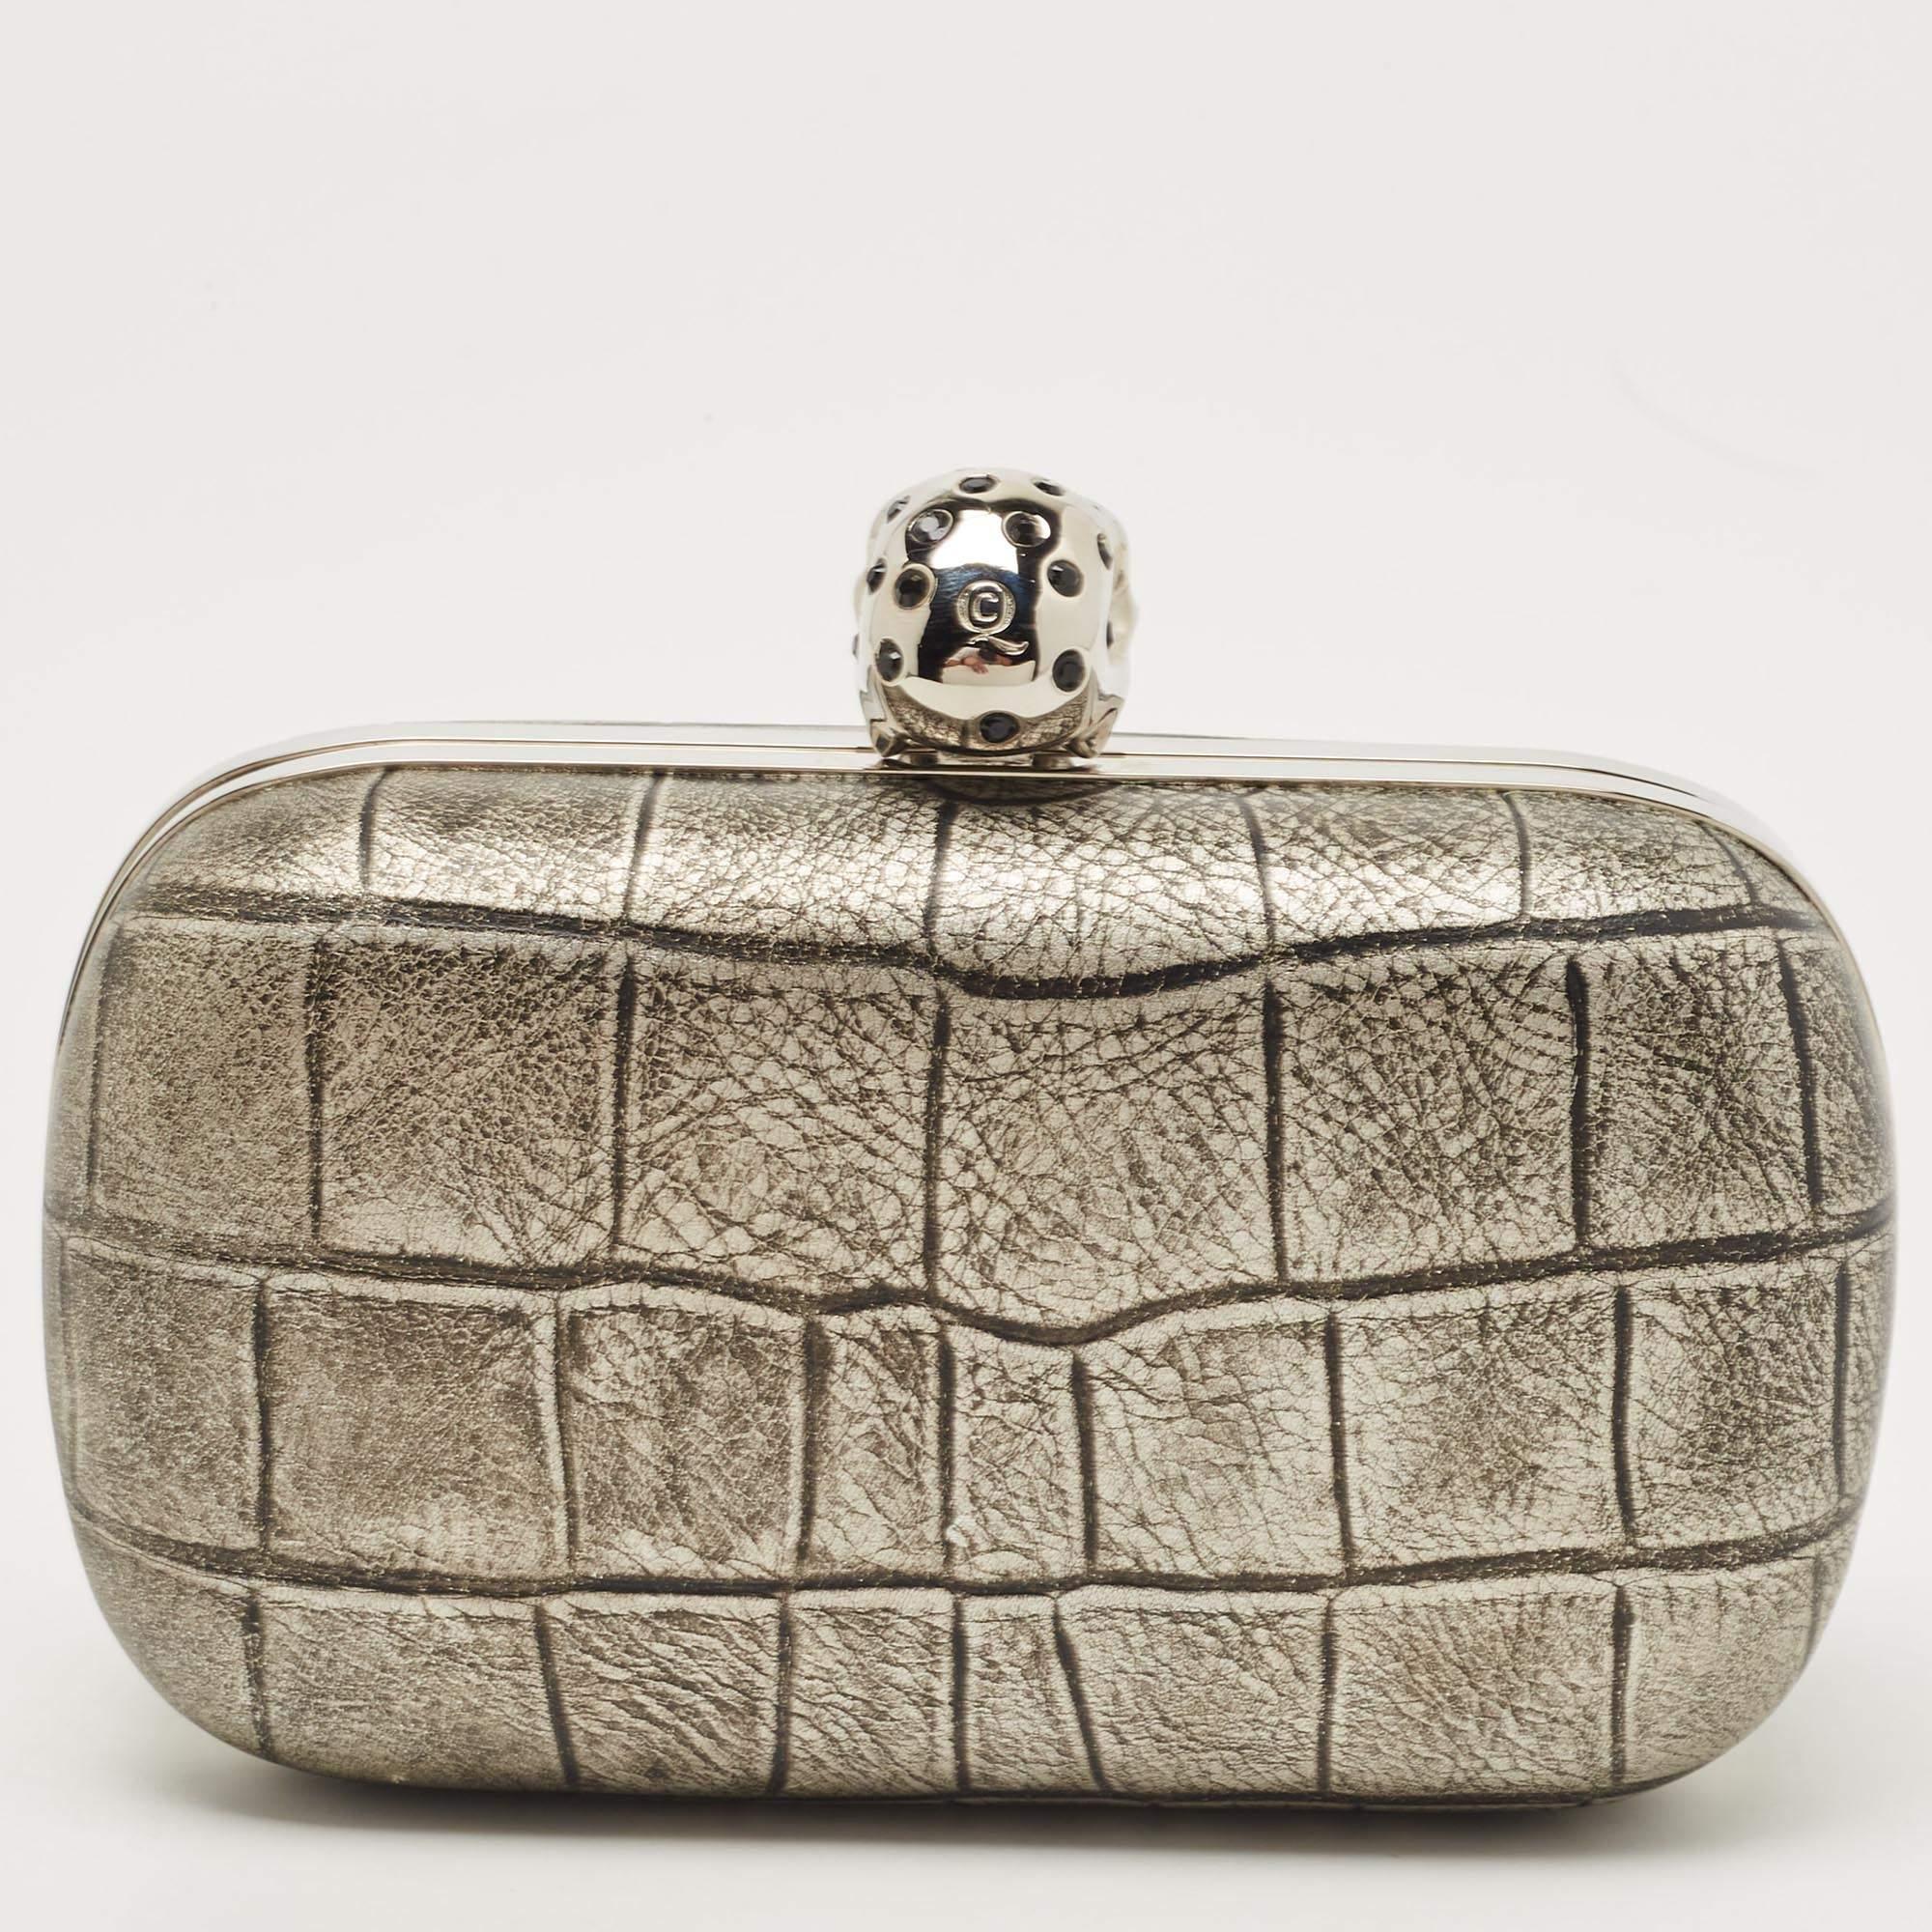 Add Alexander McQueen's signature touch to your closet with this clutch. Crafted from satin, this box clutch is embellished with crystals on the skull clasp. Its interior is lined with smooth leather and offers easy access to your little